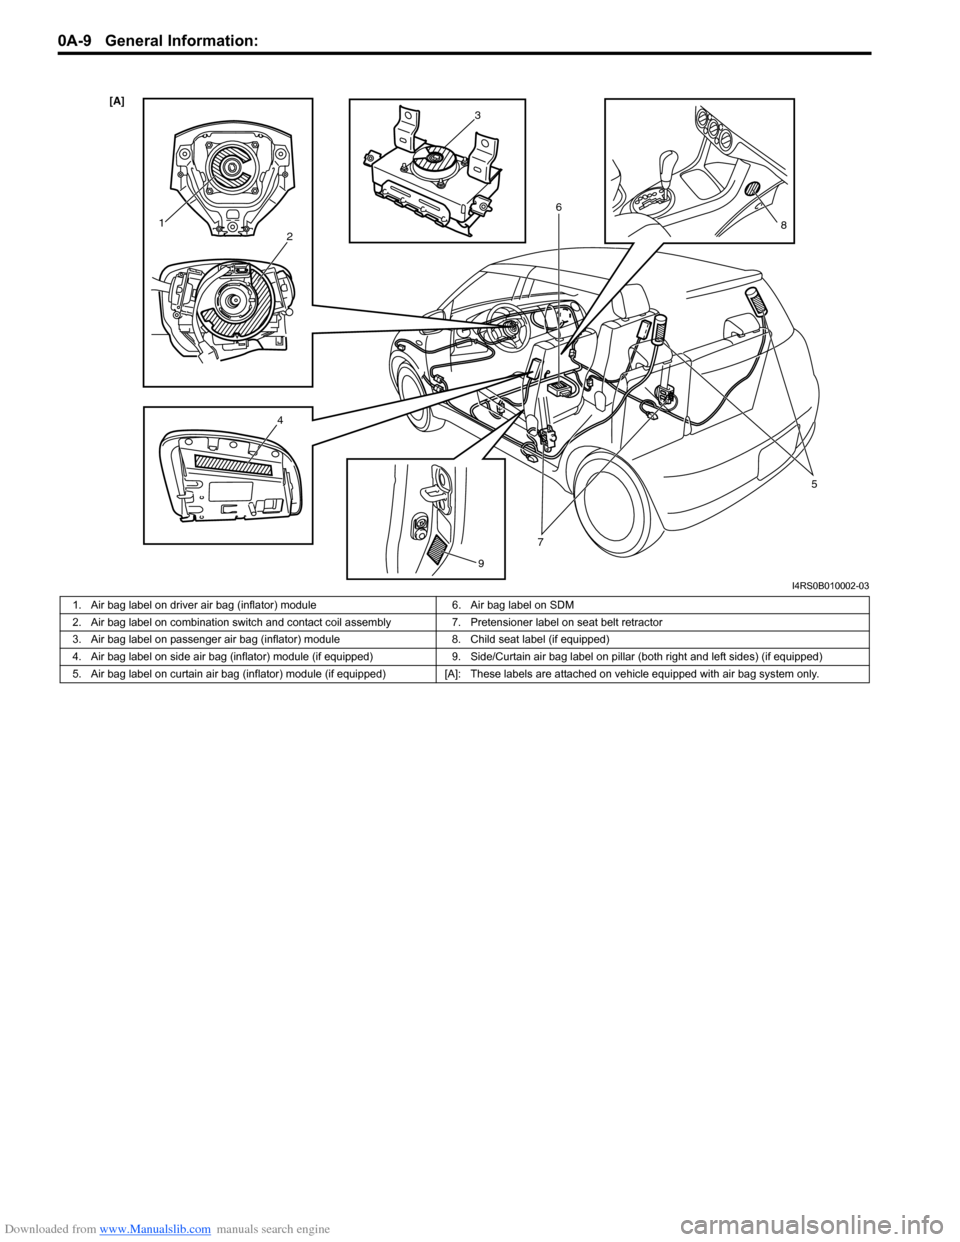 SUZUKI SWIFT 2006 2.G Service Workshop Manual Downloaded from www.Manualslib.com manuals search engine 0A-9 General Information: 
[A] 
12
4 5
6
7 8
9
3
I4RS0B010002-03
1. Air bag label on driver air bag (inflator) module 6. Air bag label on SDM
2